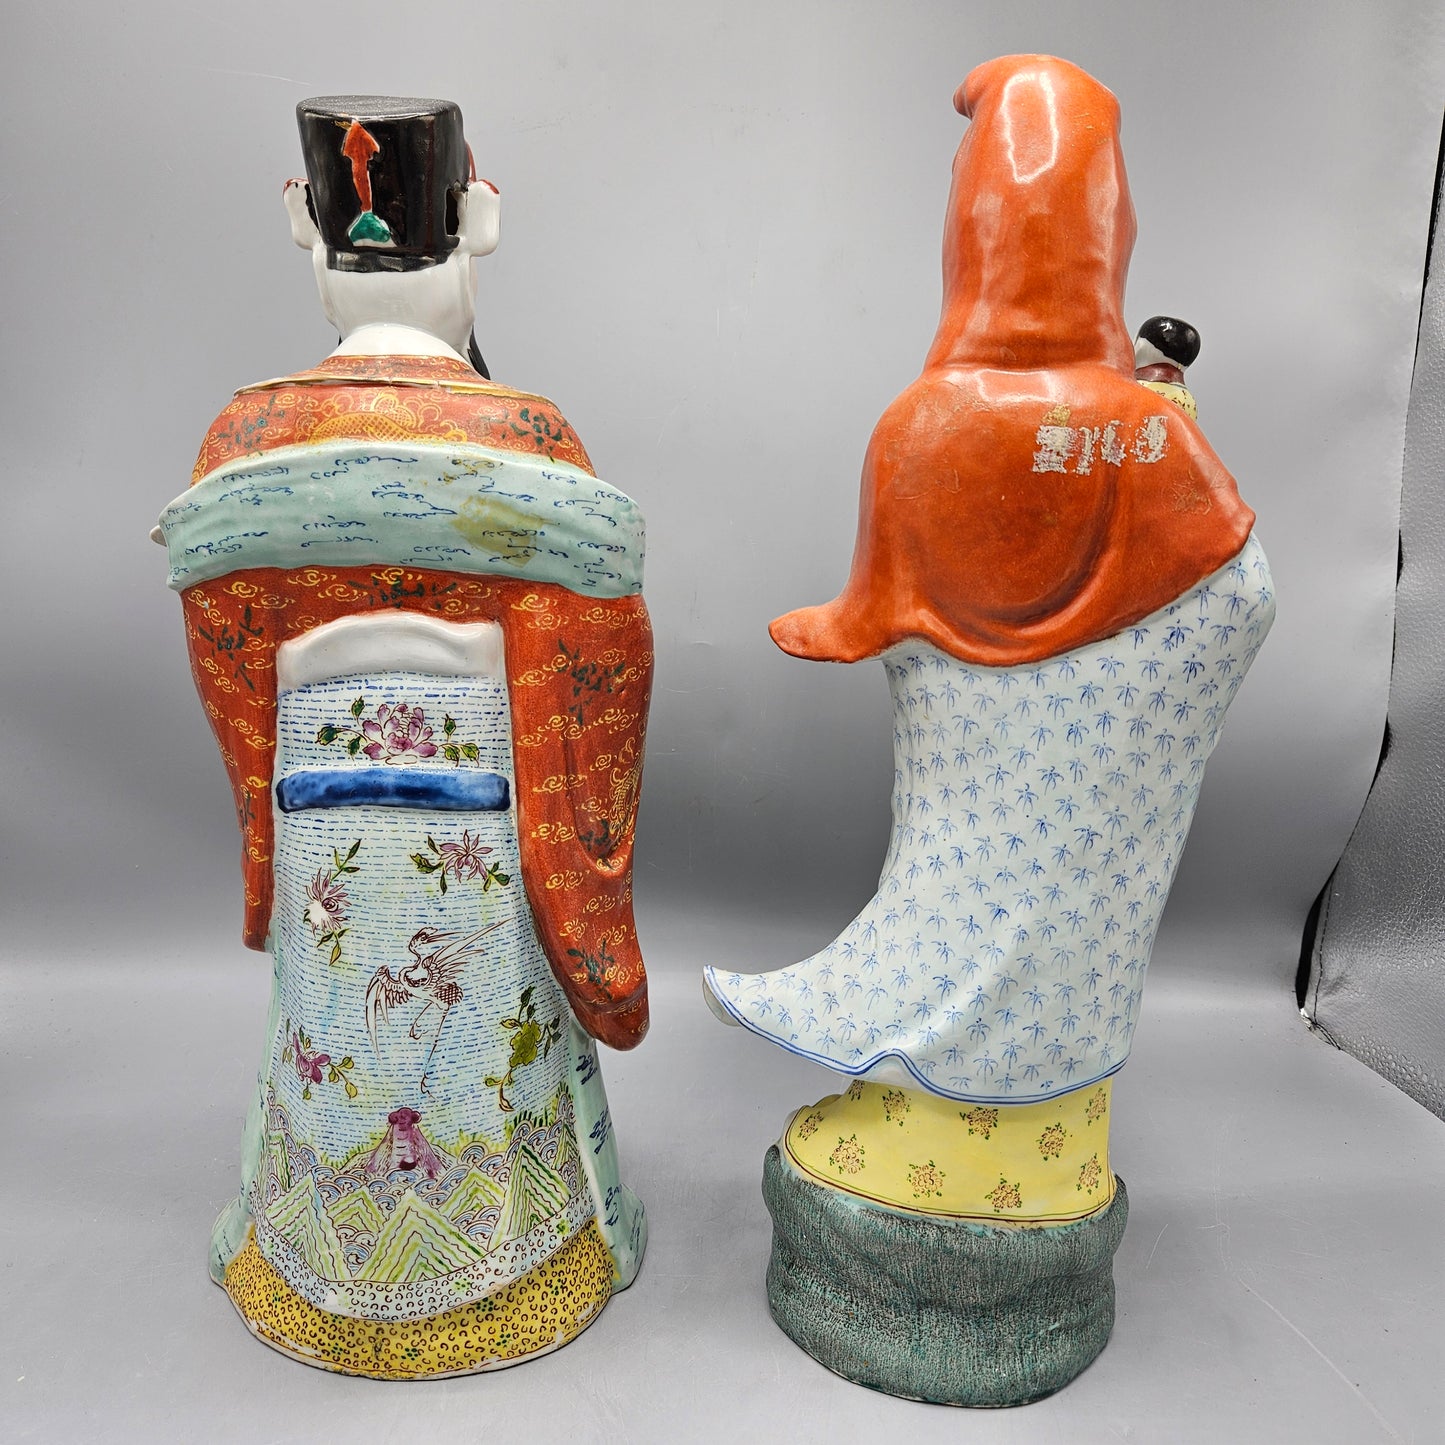 Pair of Vintage Chinese Porcelain Male & Female Figures